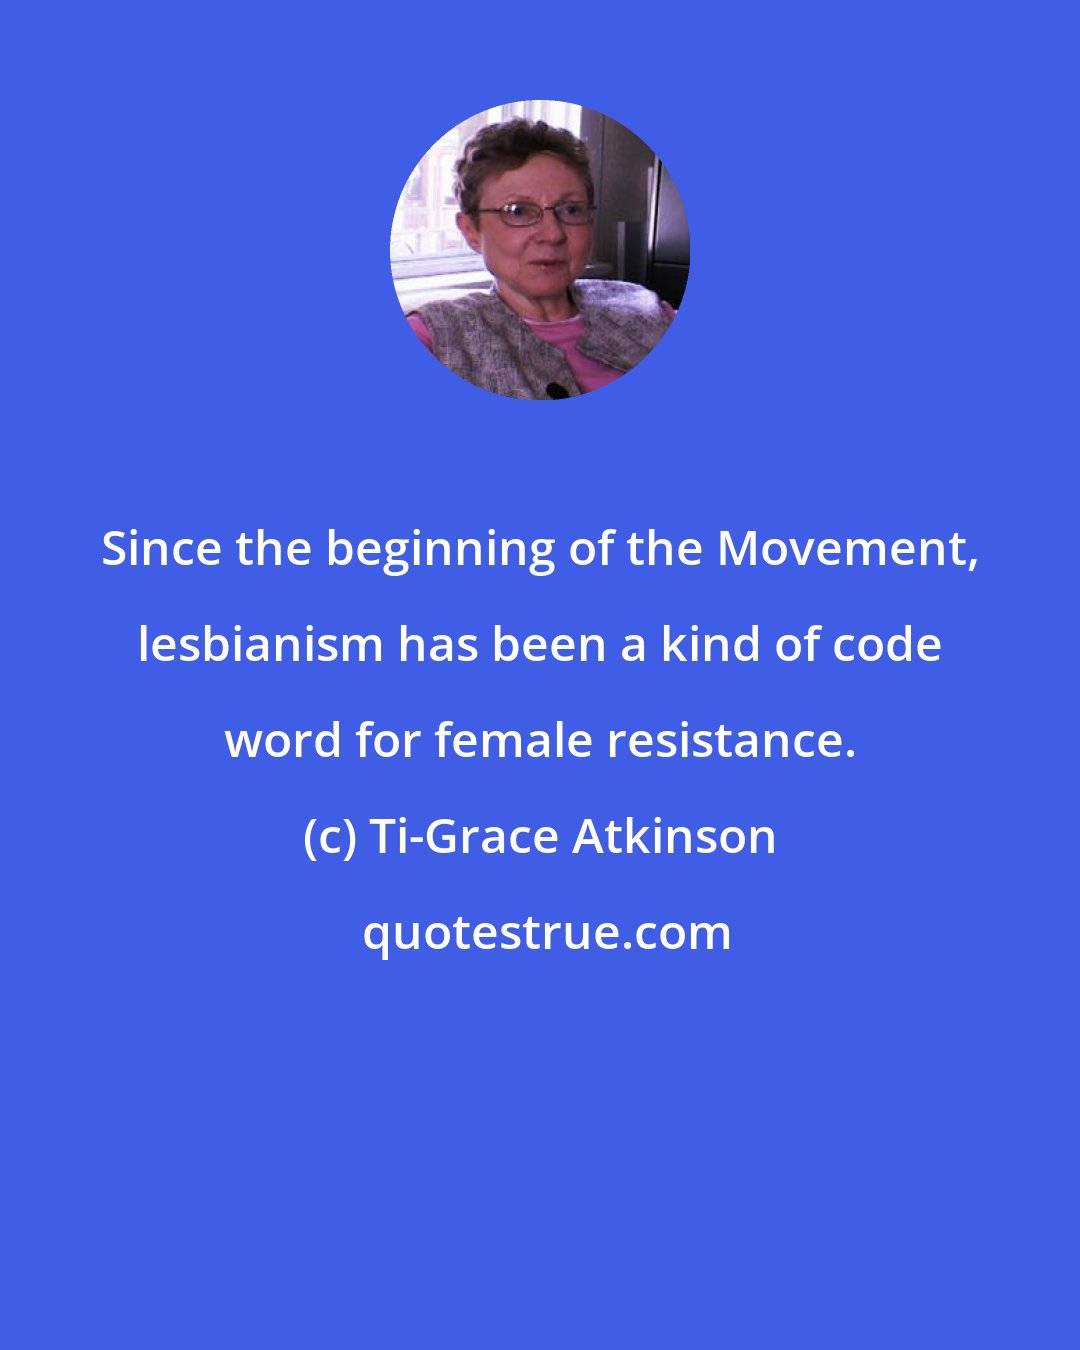 Ti-Grace Atkinson: Since the beginning of the Movement, lesbianism has been a kind of code word for female resistance.